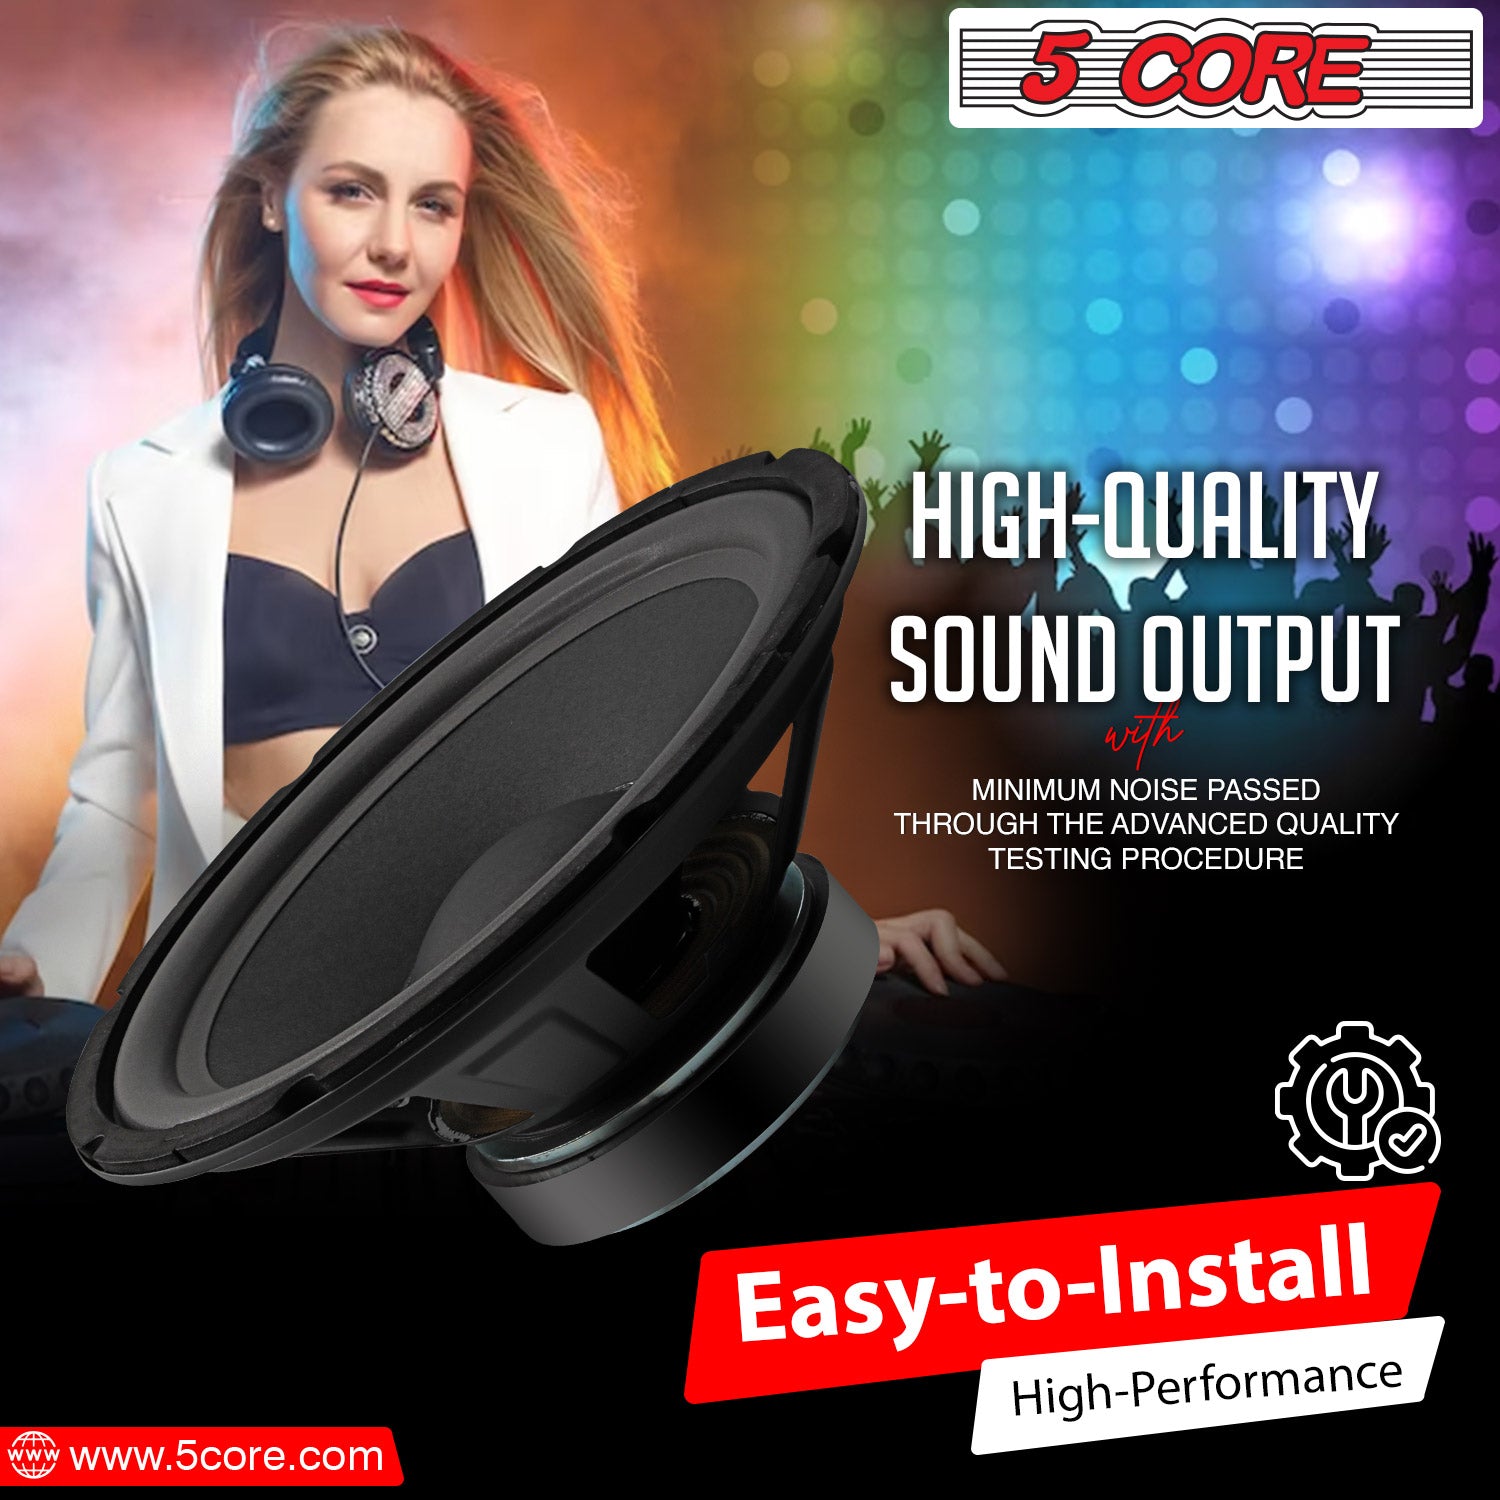 10" subwoofer easy to install and gives high quality sound output